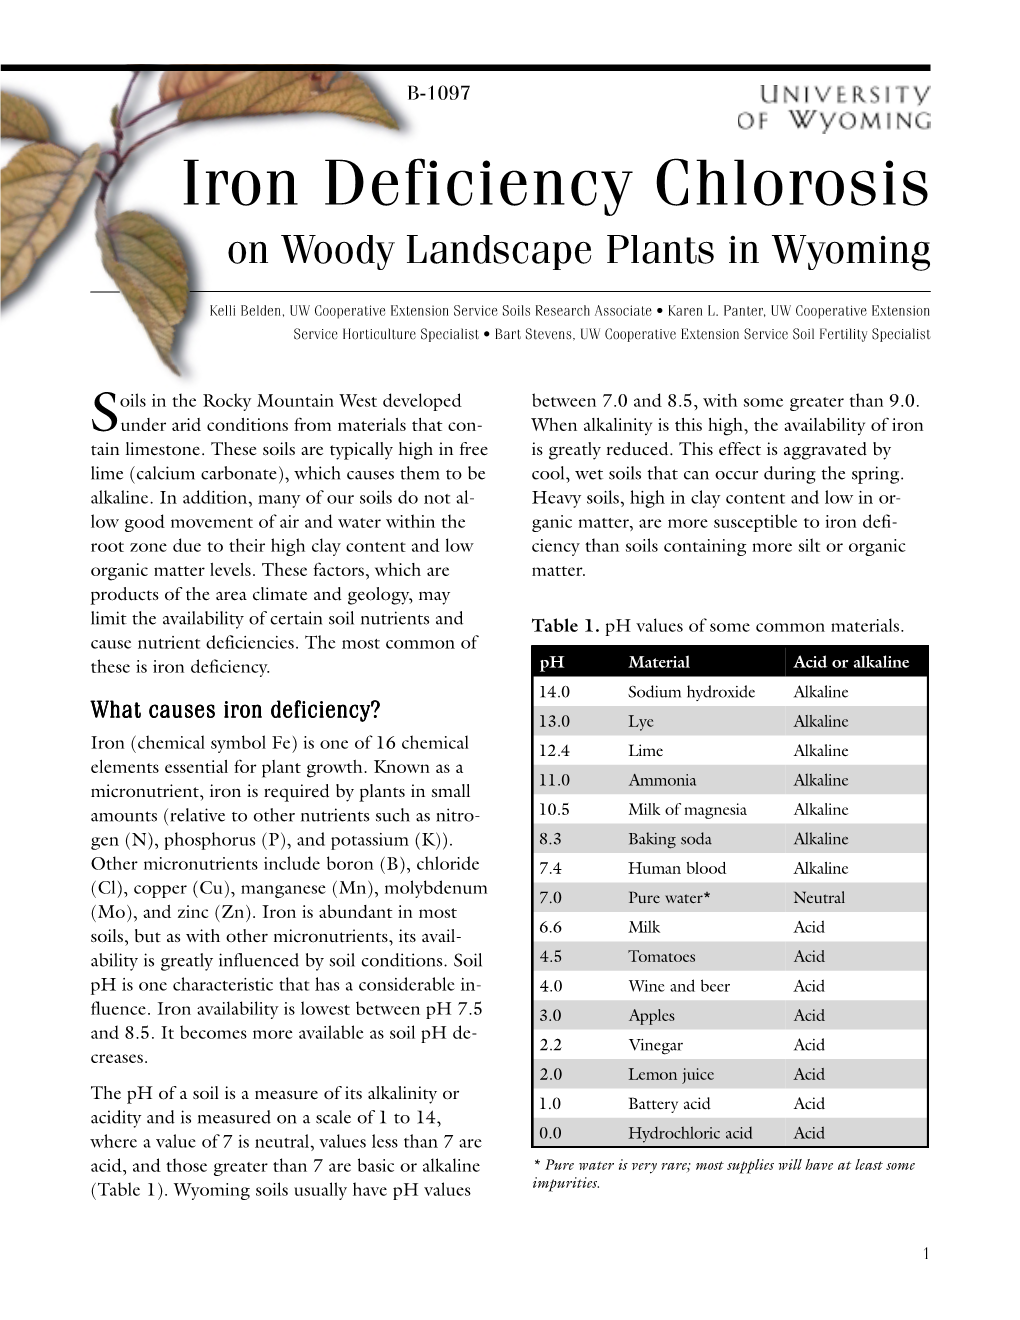 Iron Deficiency Chlorosis on Woody Landscape Plants in Wyoming